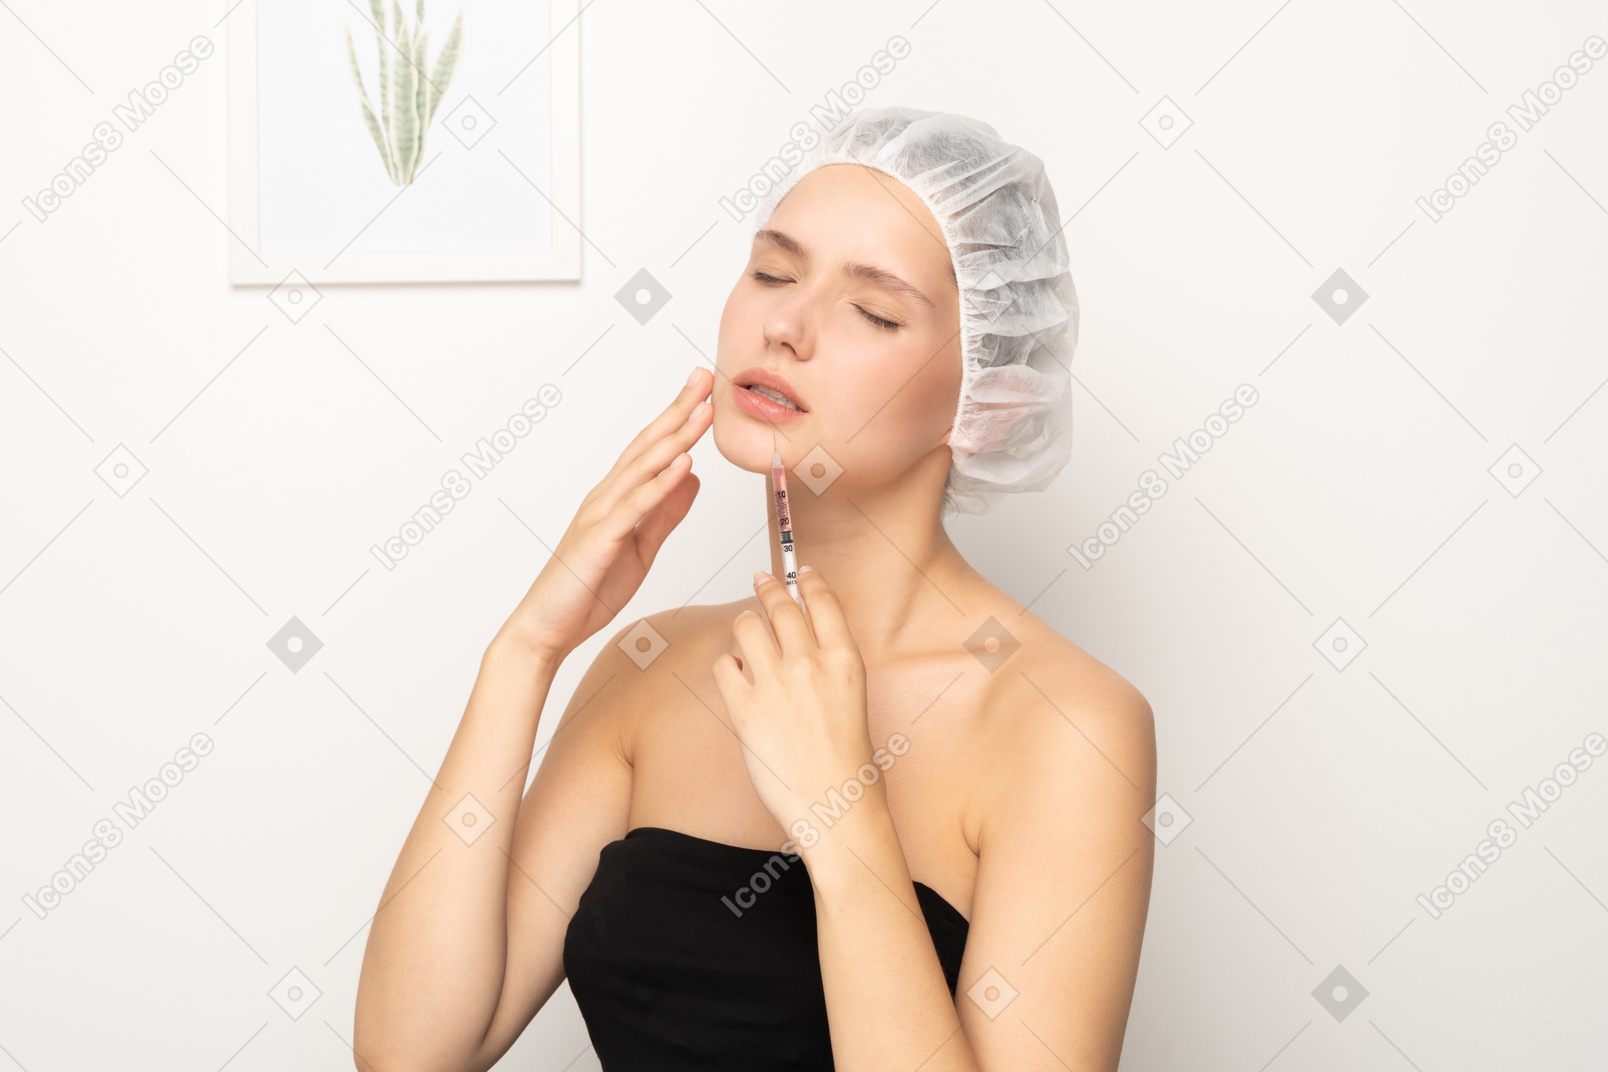 Young woman with syringe touching her face